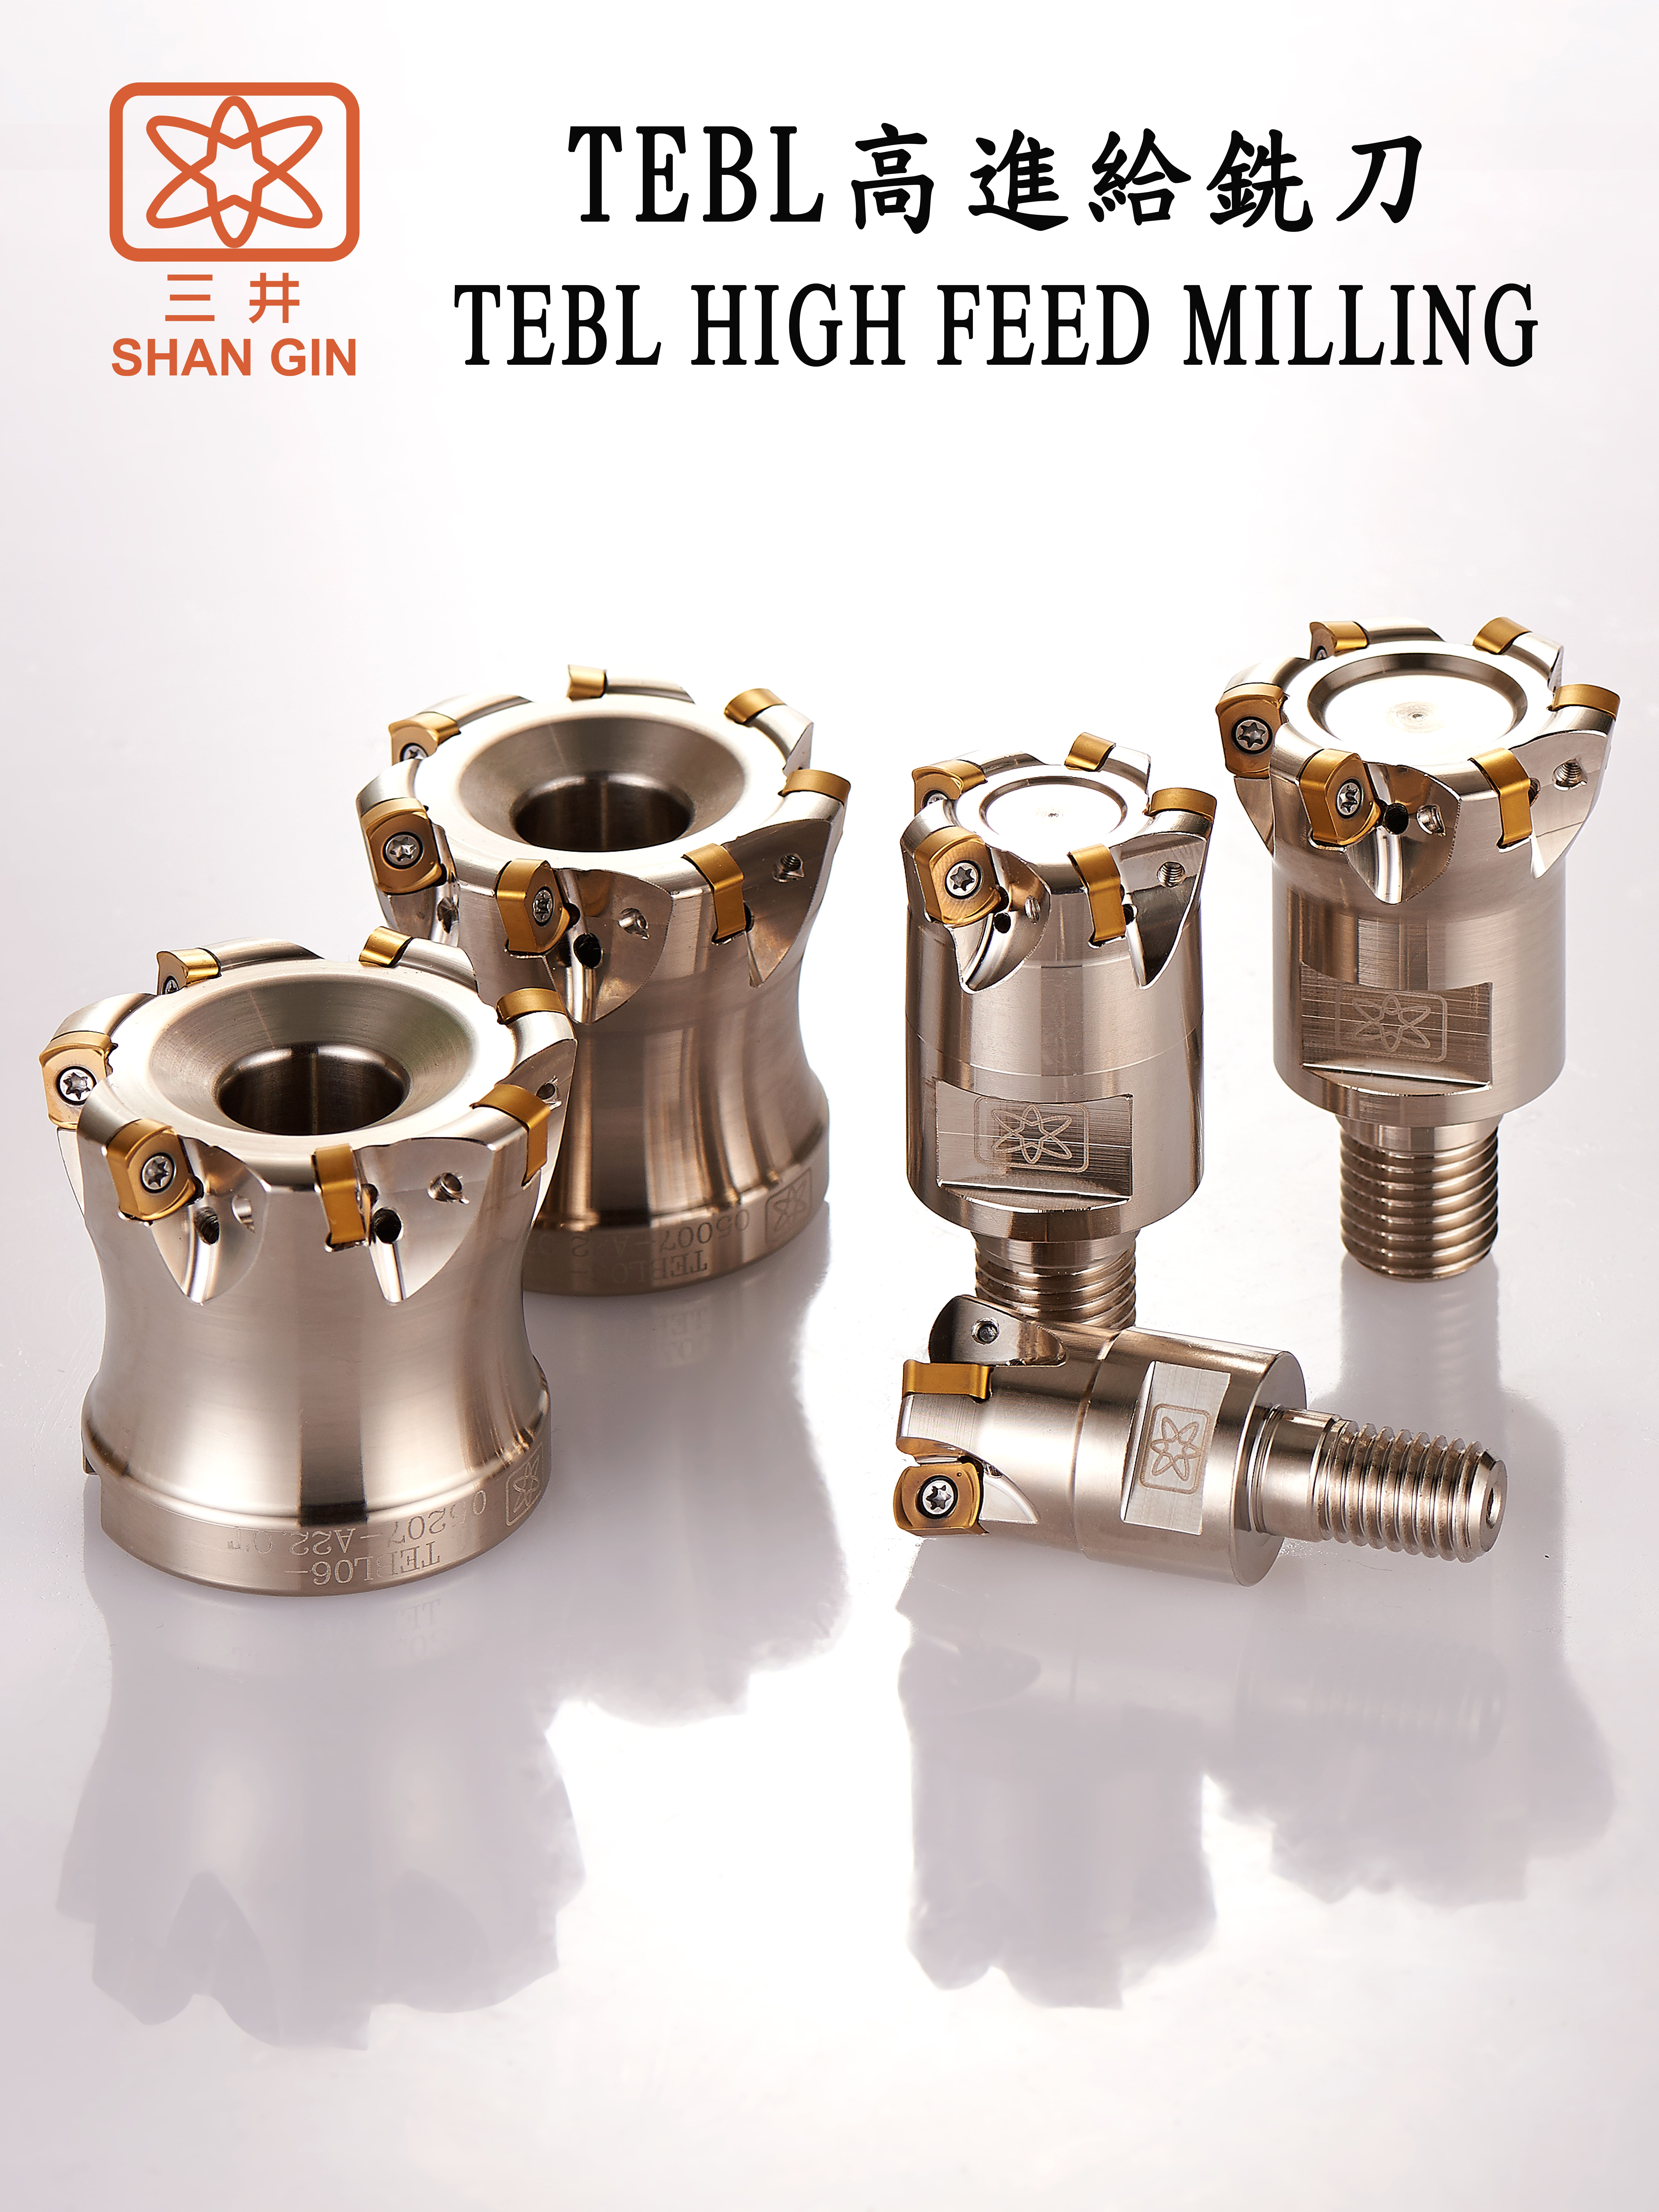 Products|TEBL HIGH FEED MILLING